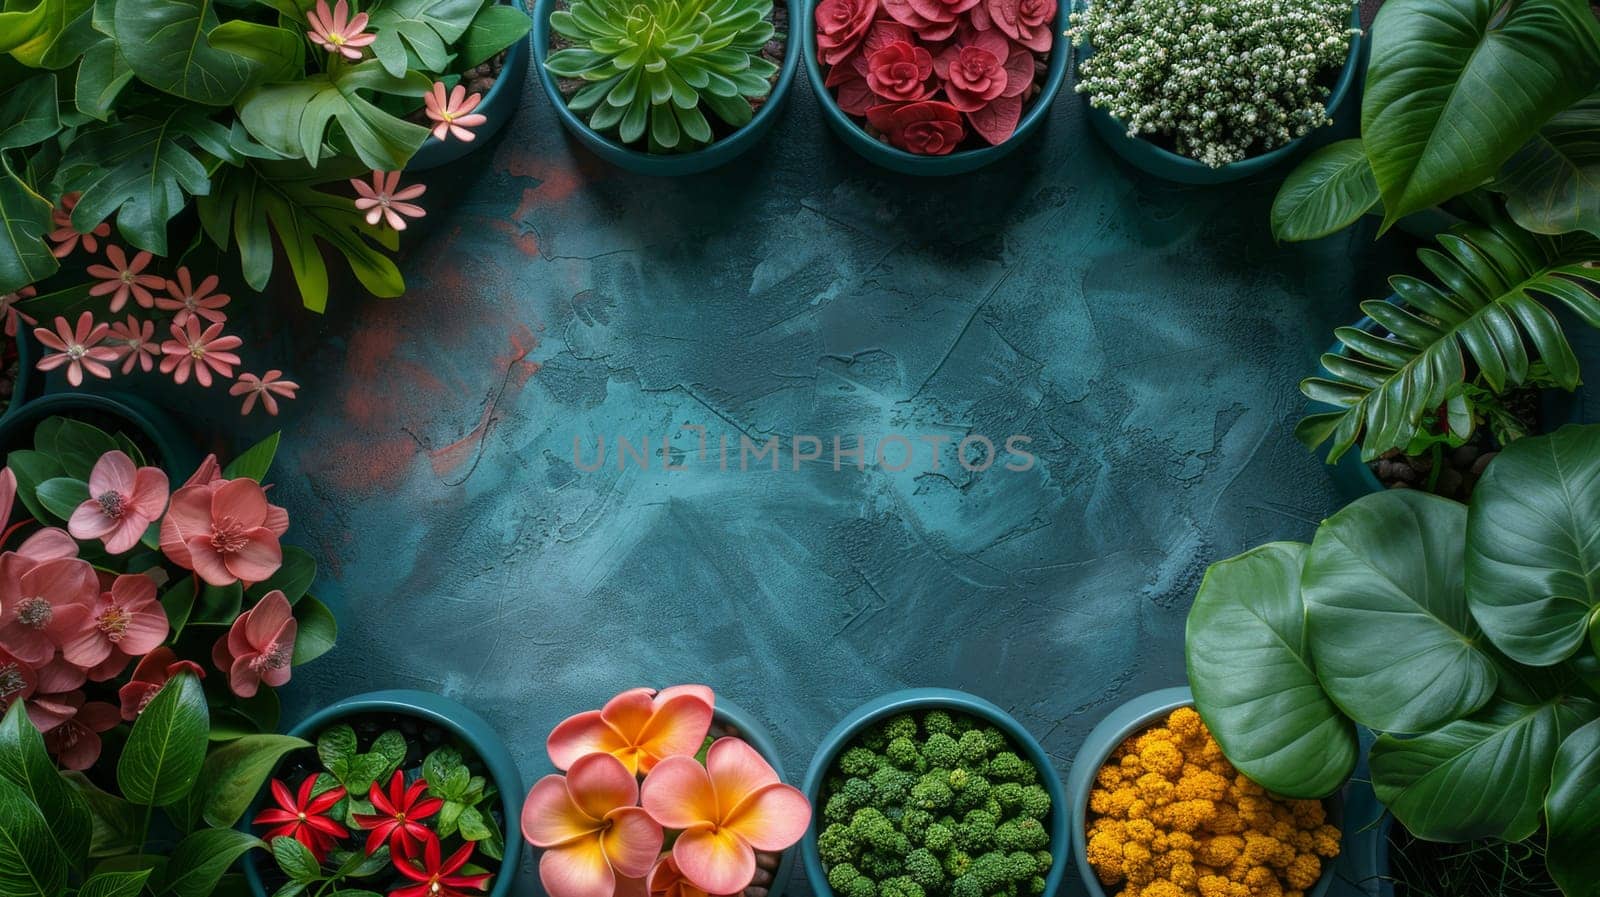 Multicolored flowers on a blue background. Environmental background design.